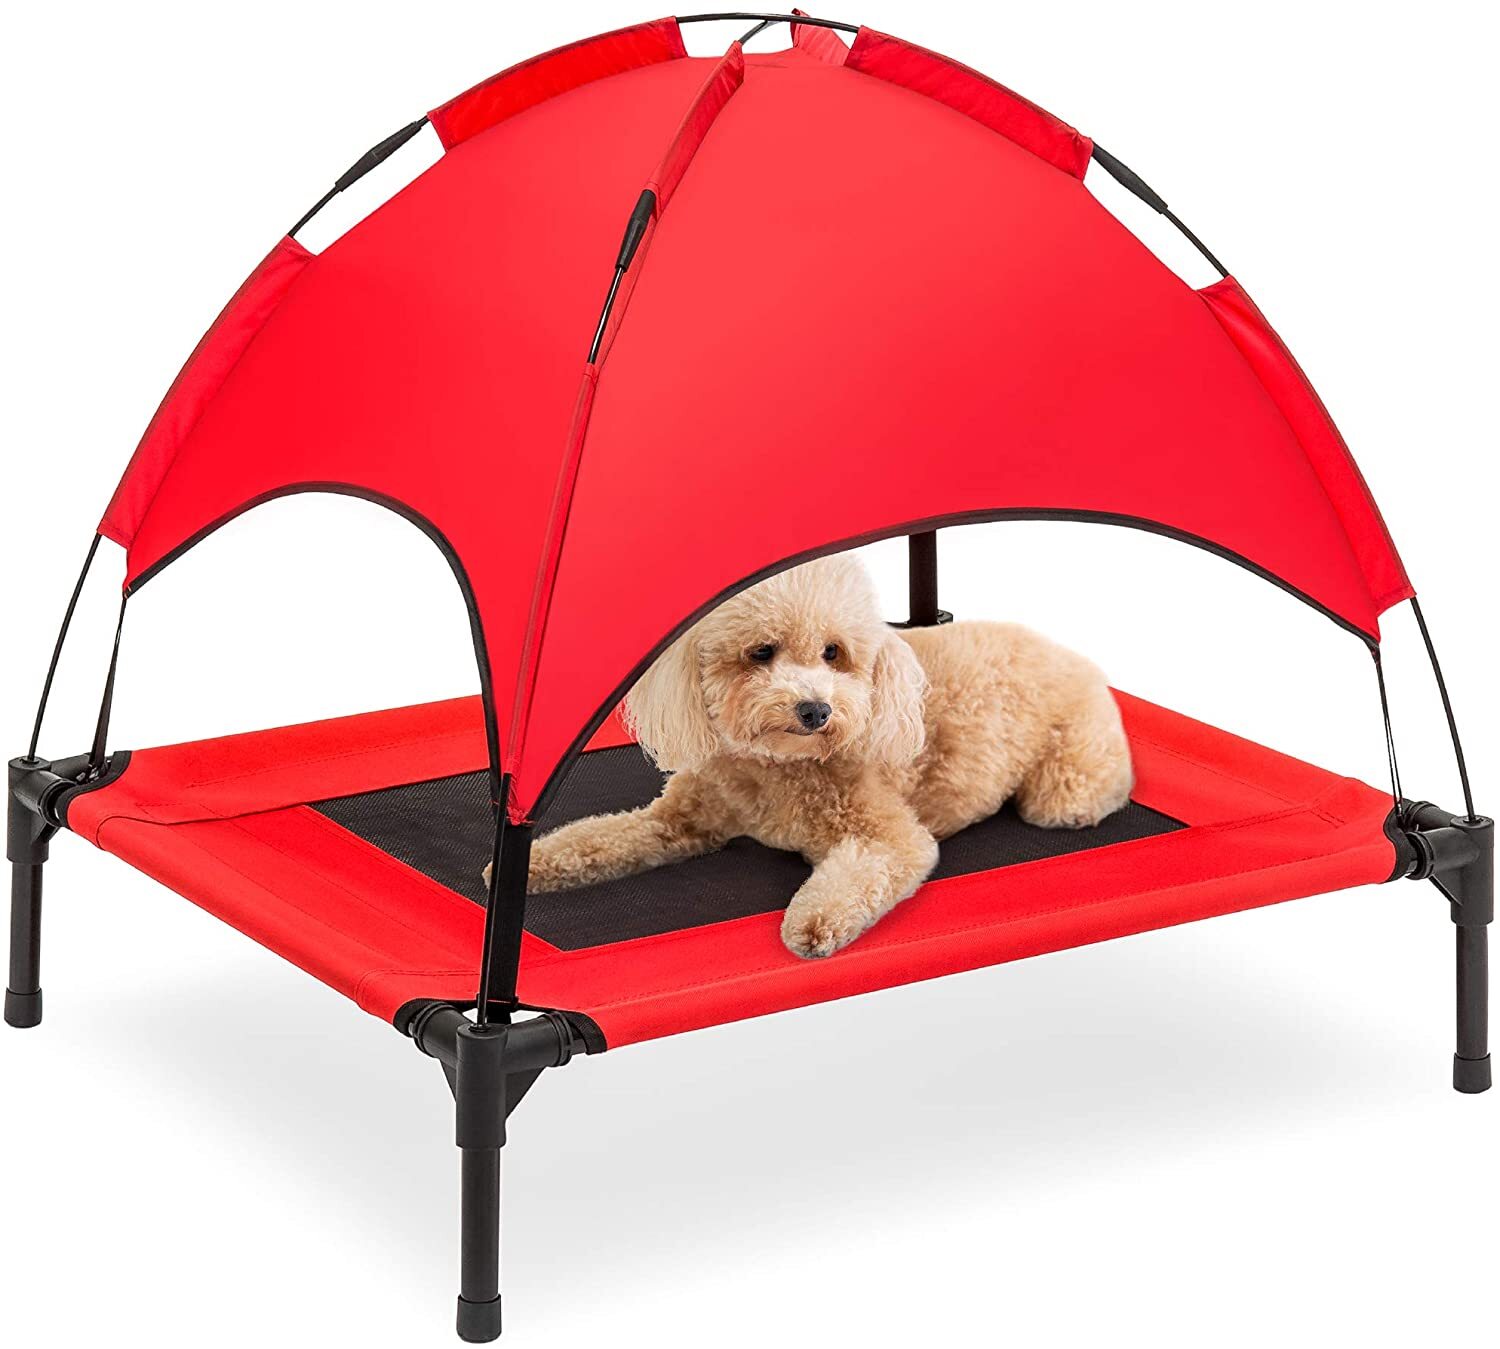 Breathable dog chairs for outside